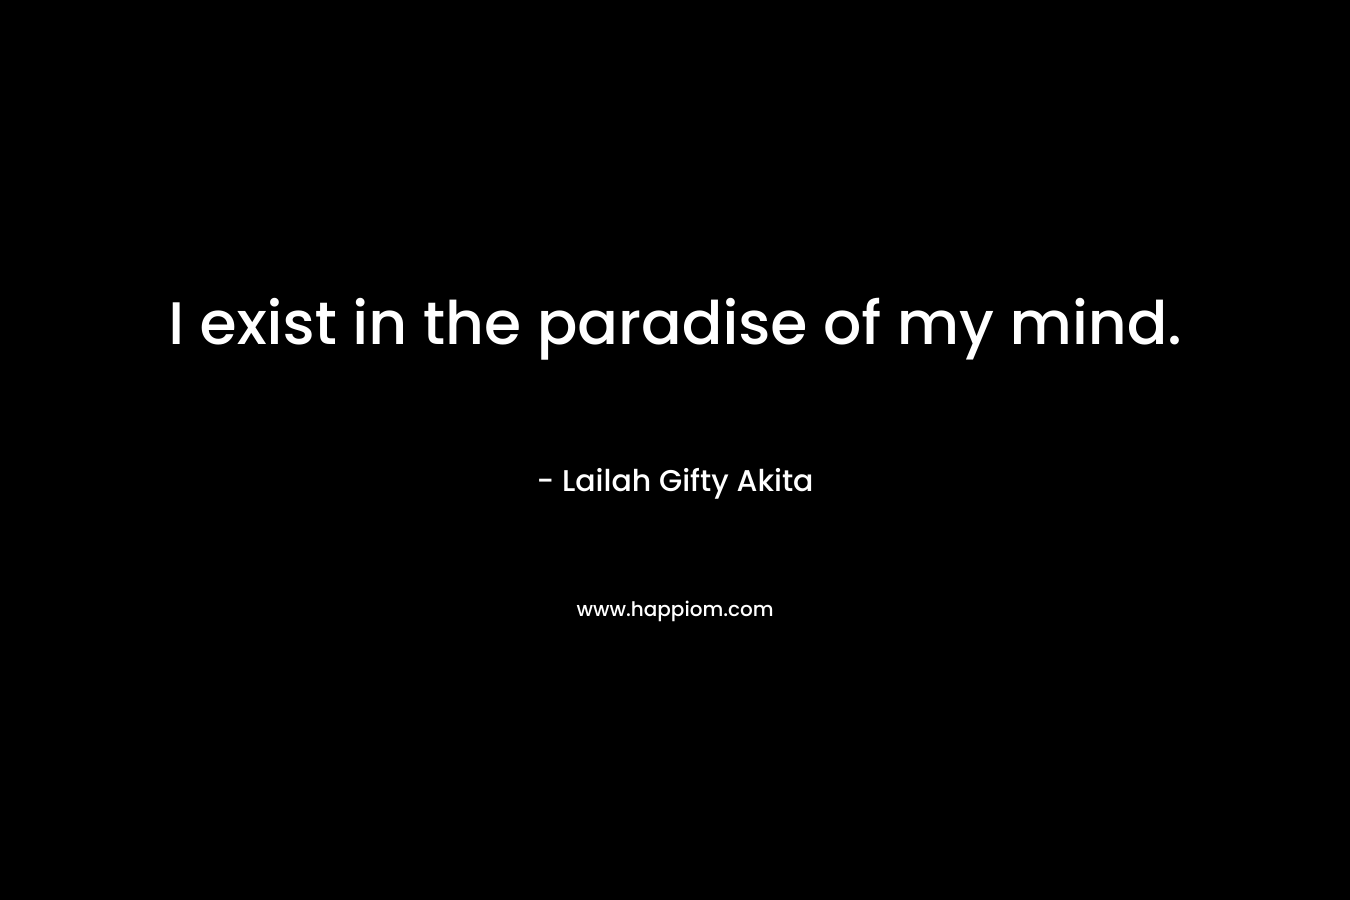 I exist in the paradise of my mind.